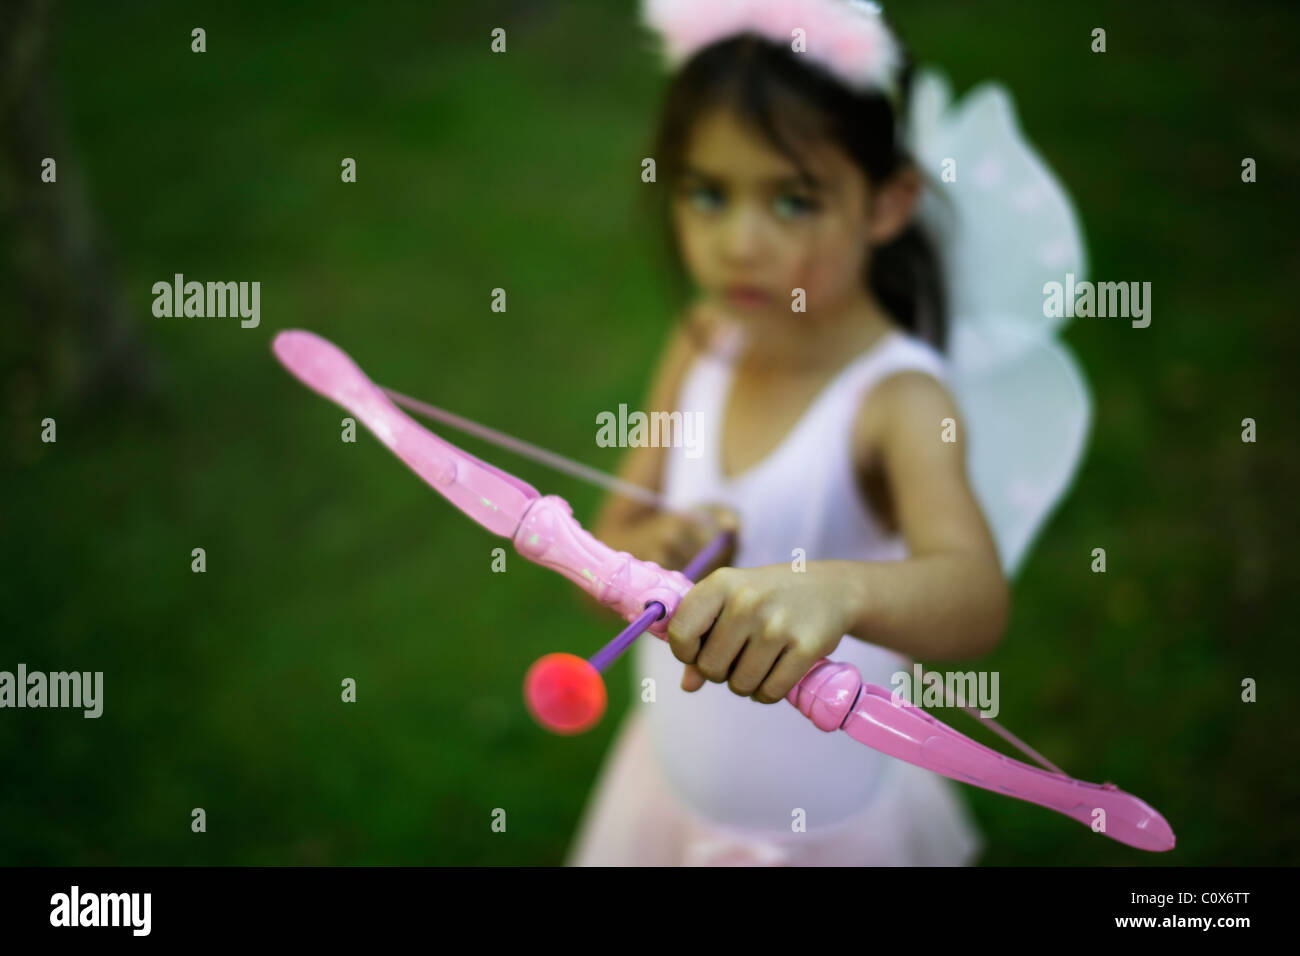 Five year old girl girl in fairy costume with pink bow and arrow Stock Photo